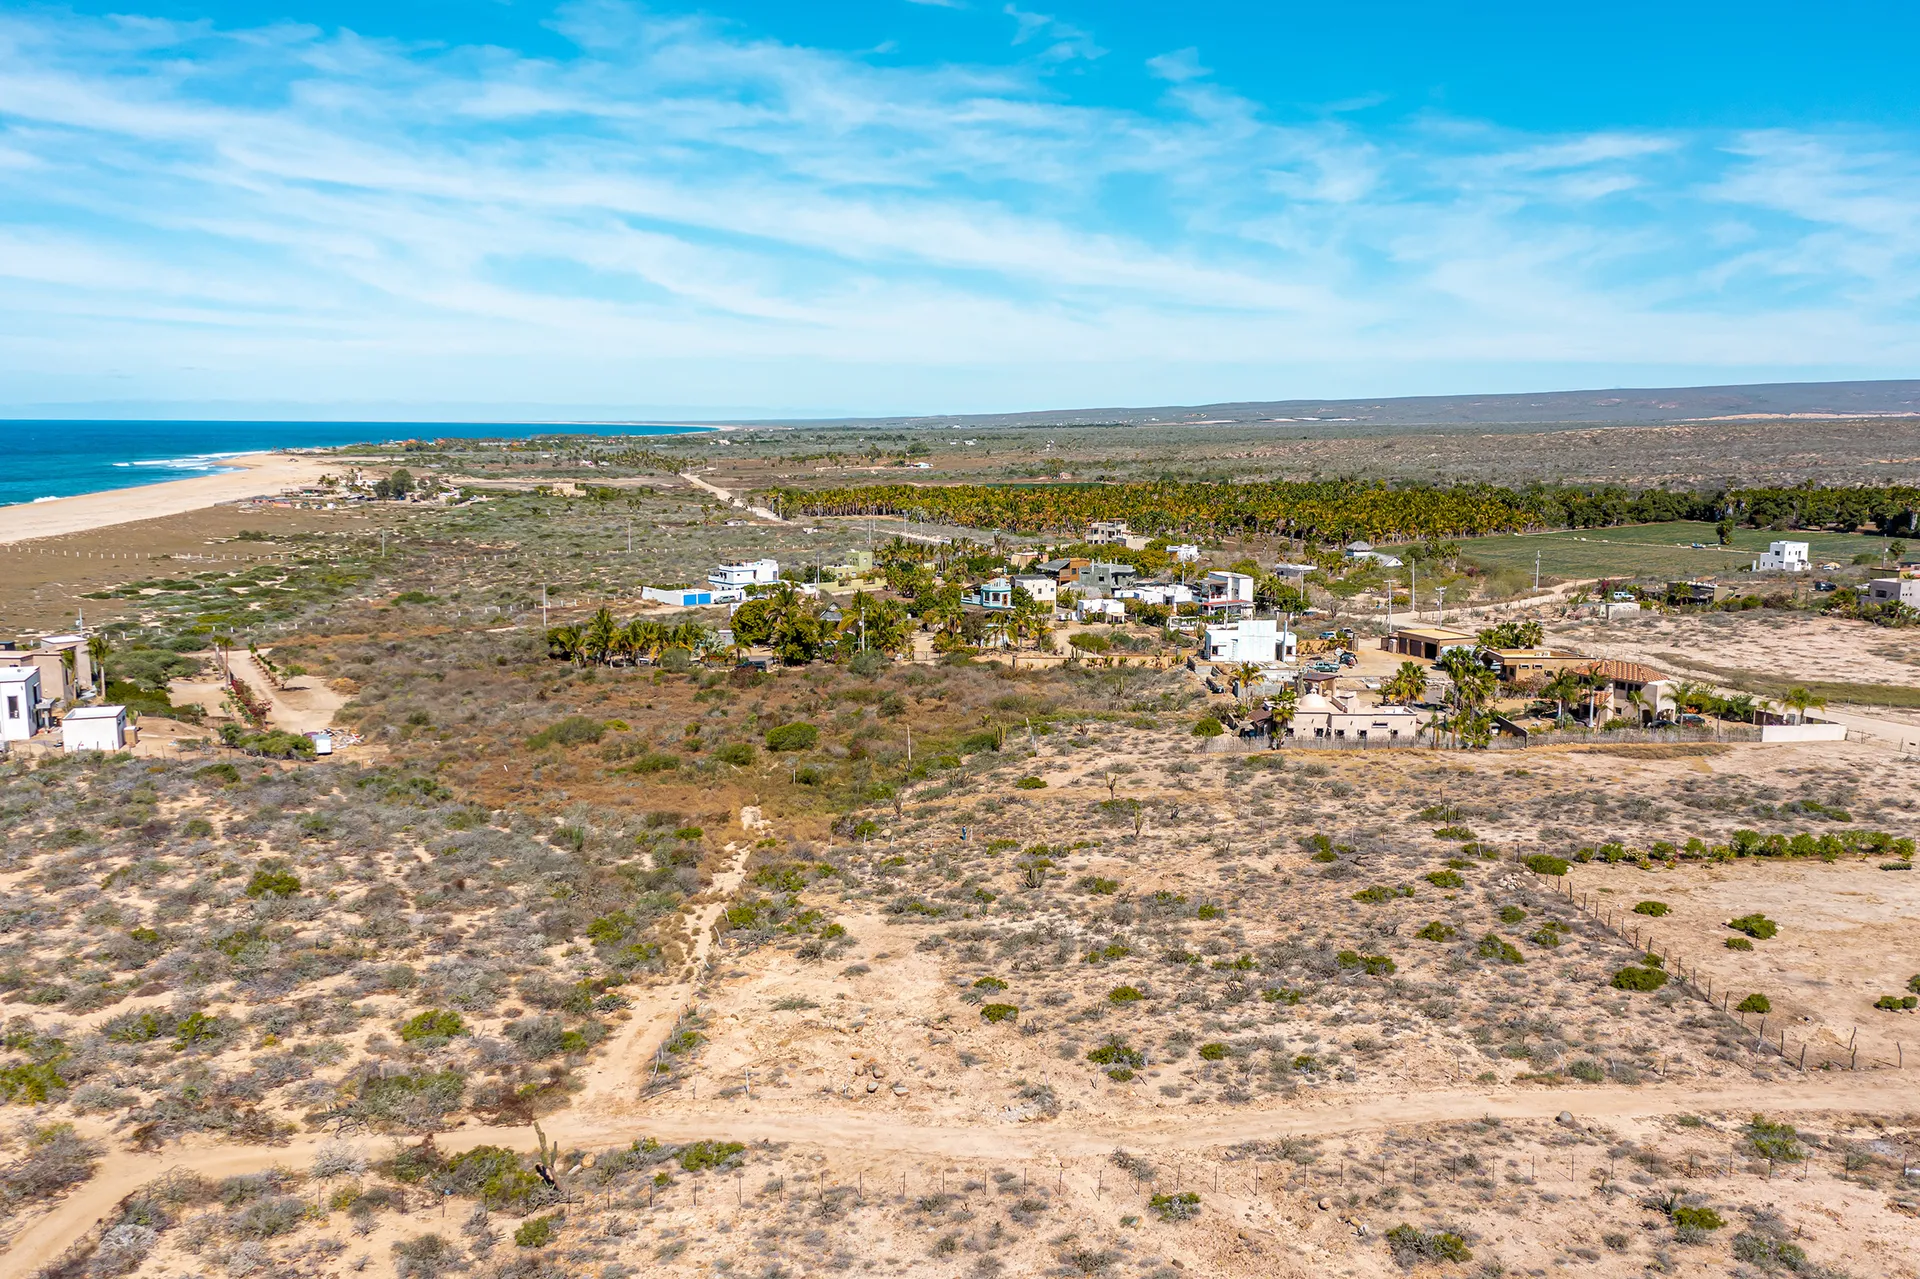 Belalus One Acre lot size is situated only 3 miles from downtown Todos Santo